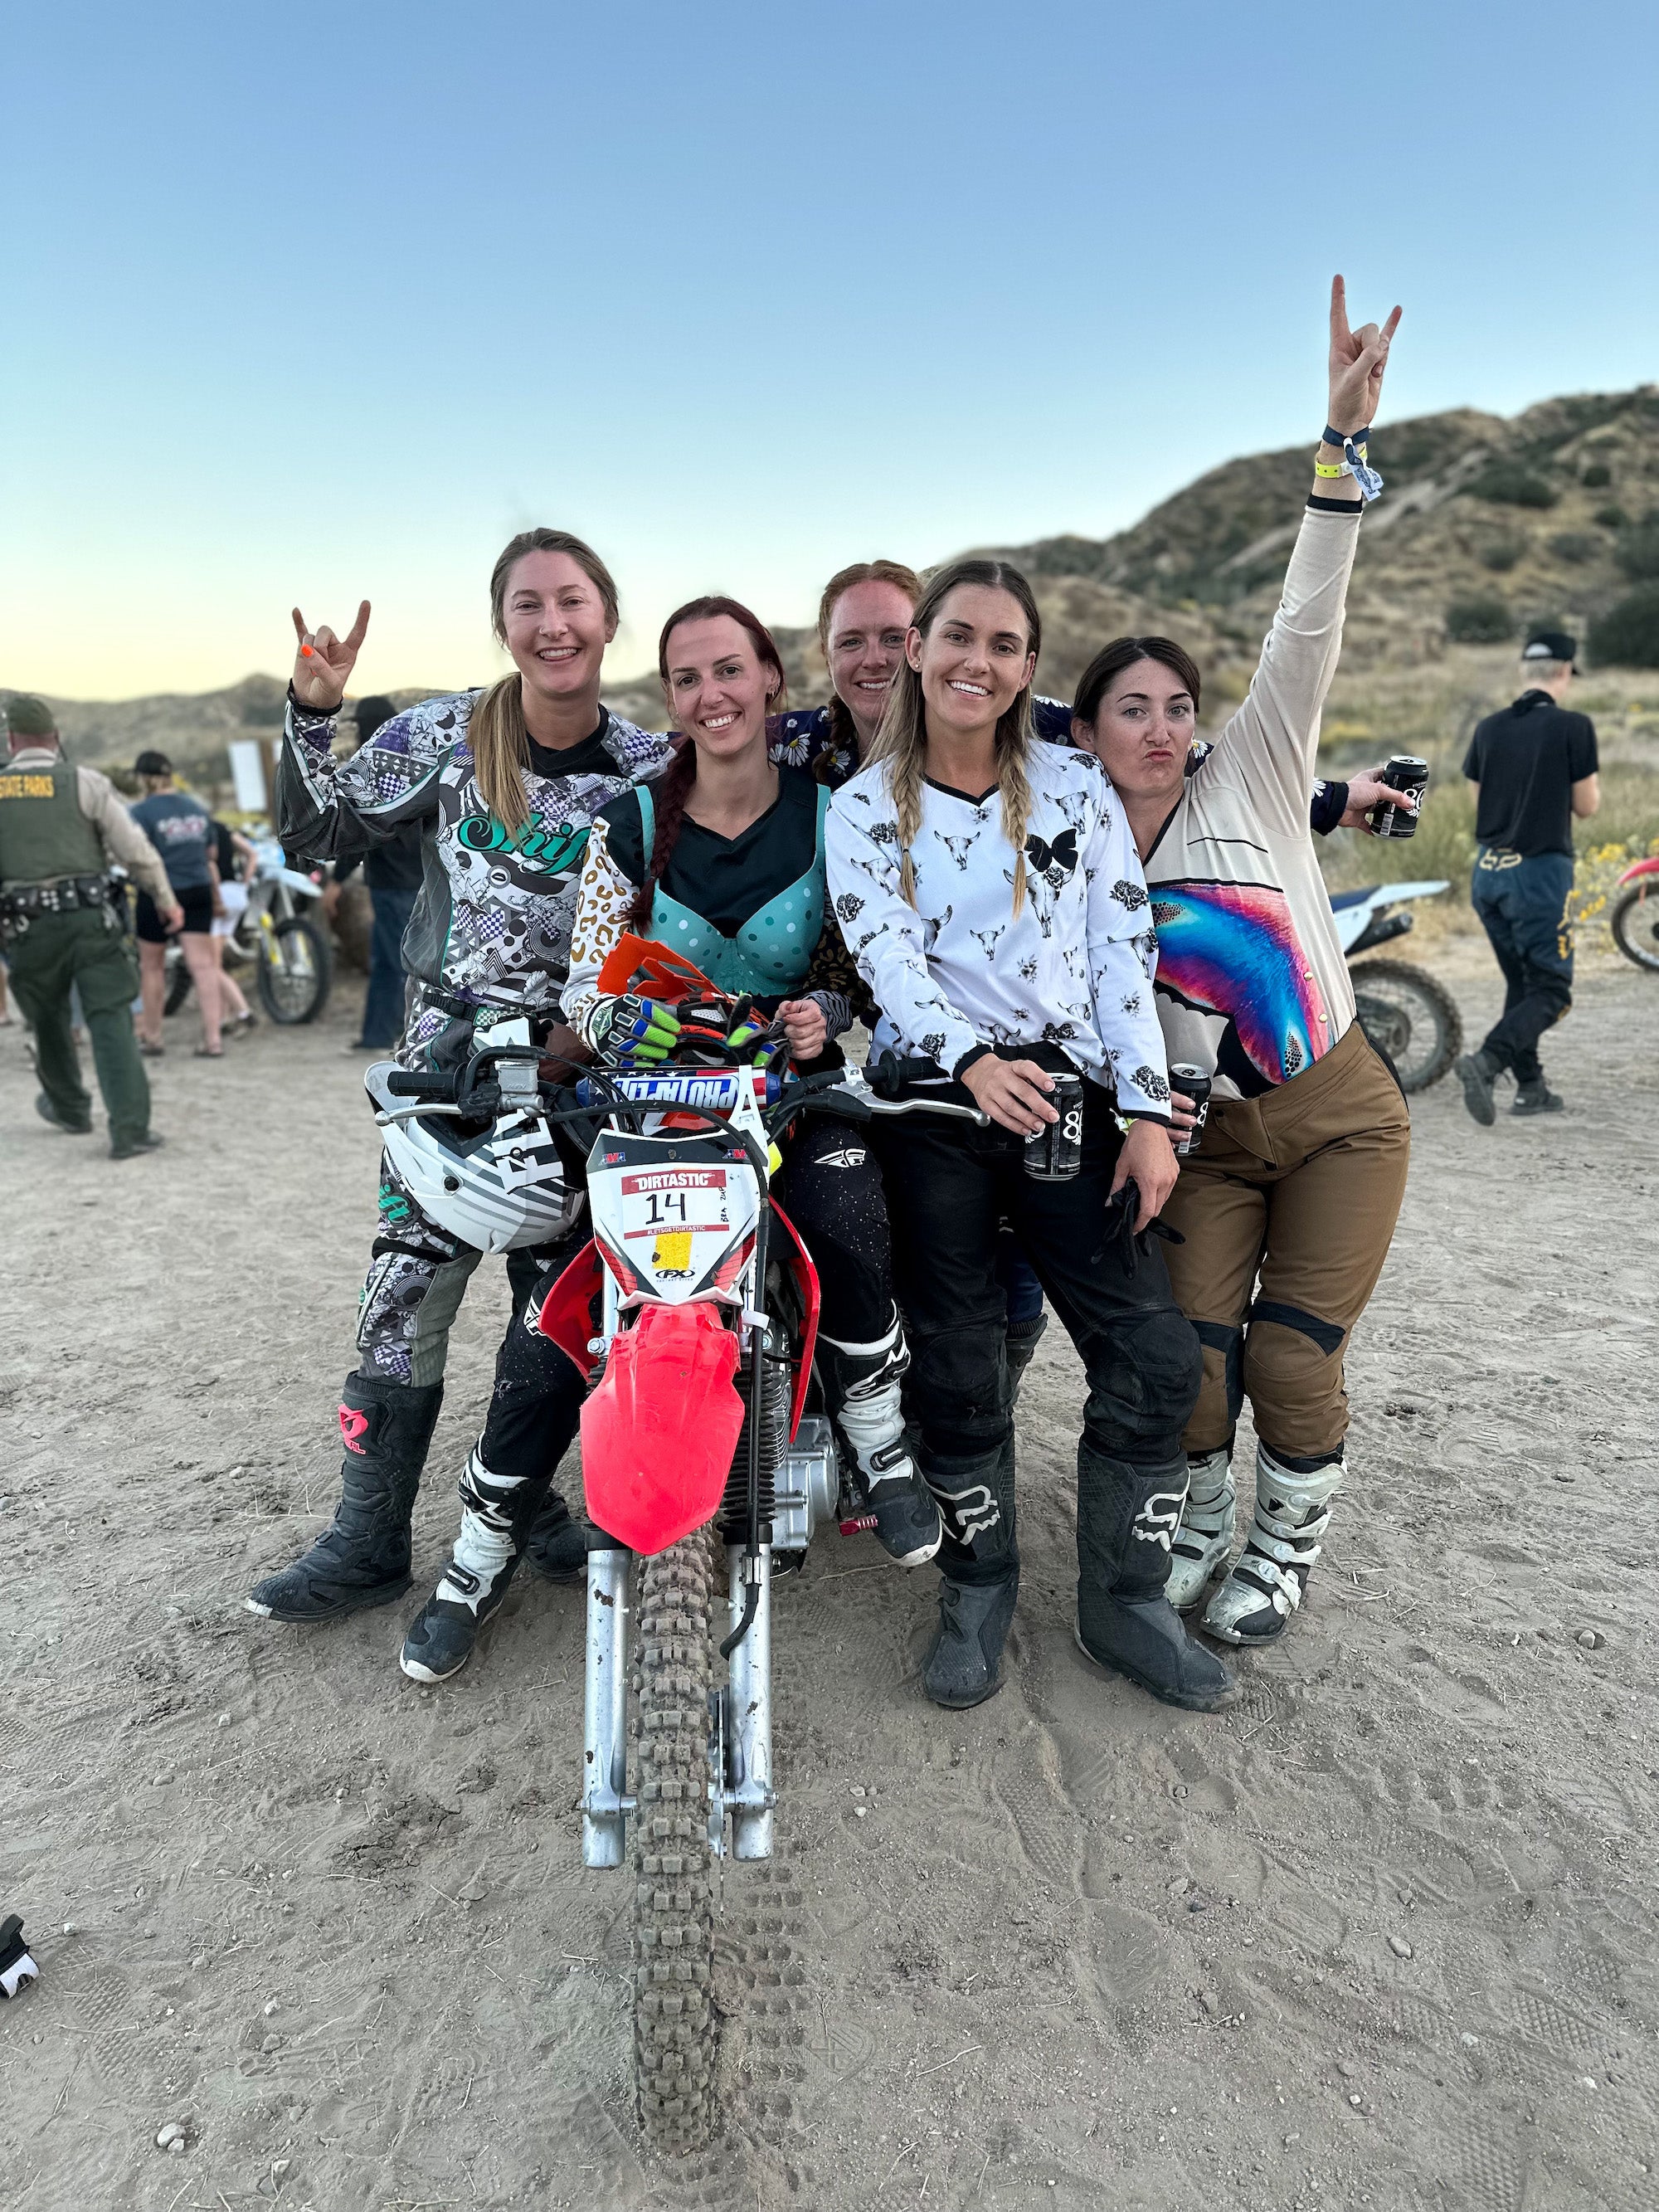 Five women gathered around a dirt bike, cheering after winning a relay race. They are wearing cute women's dirt bike gear by MCREY.